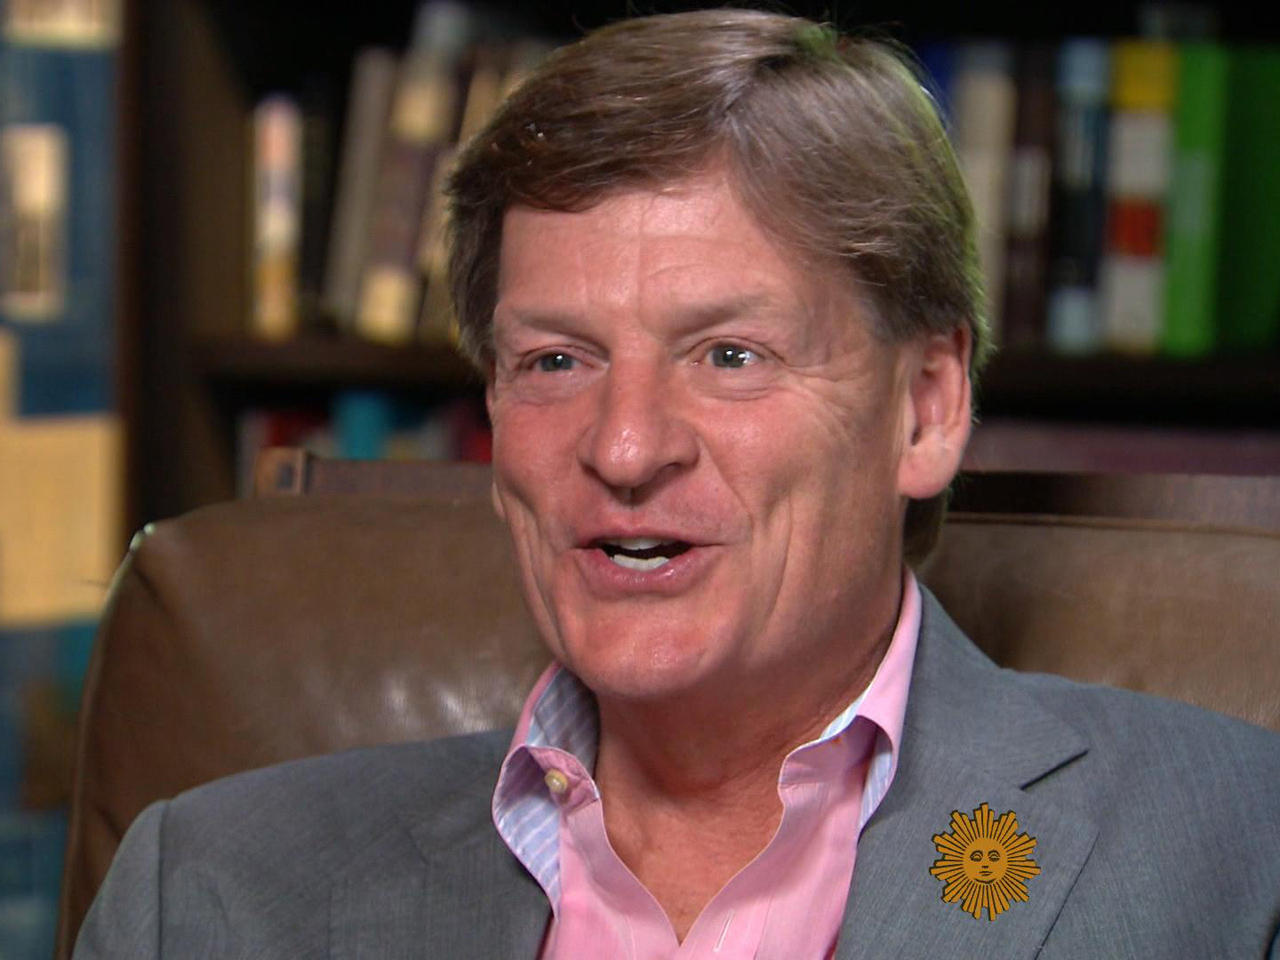 the undoing project michael lewis summary